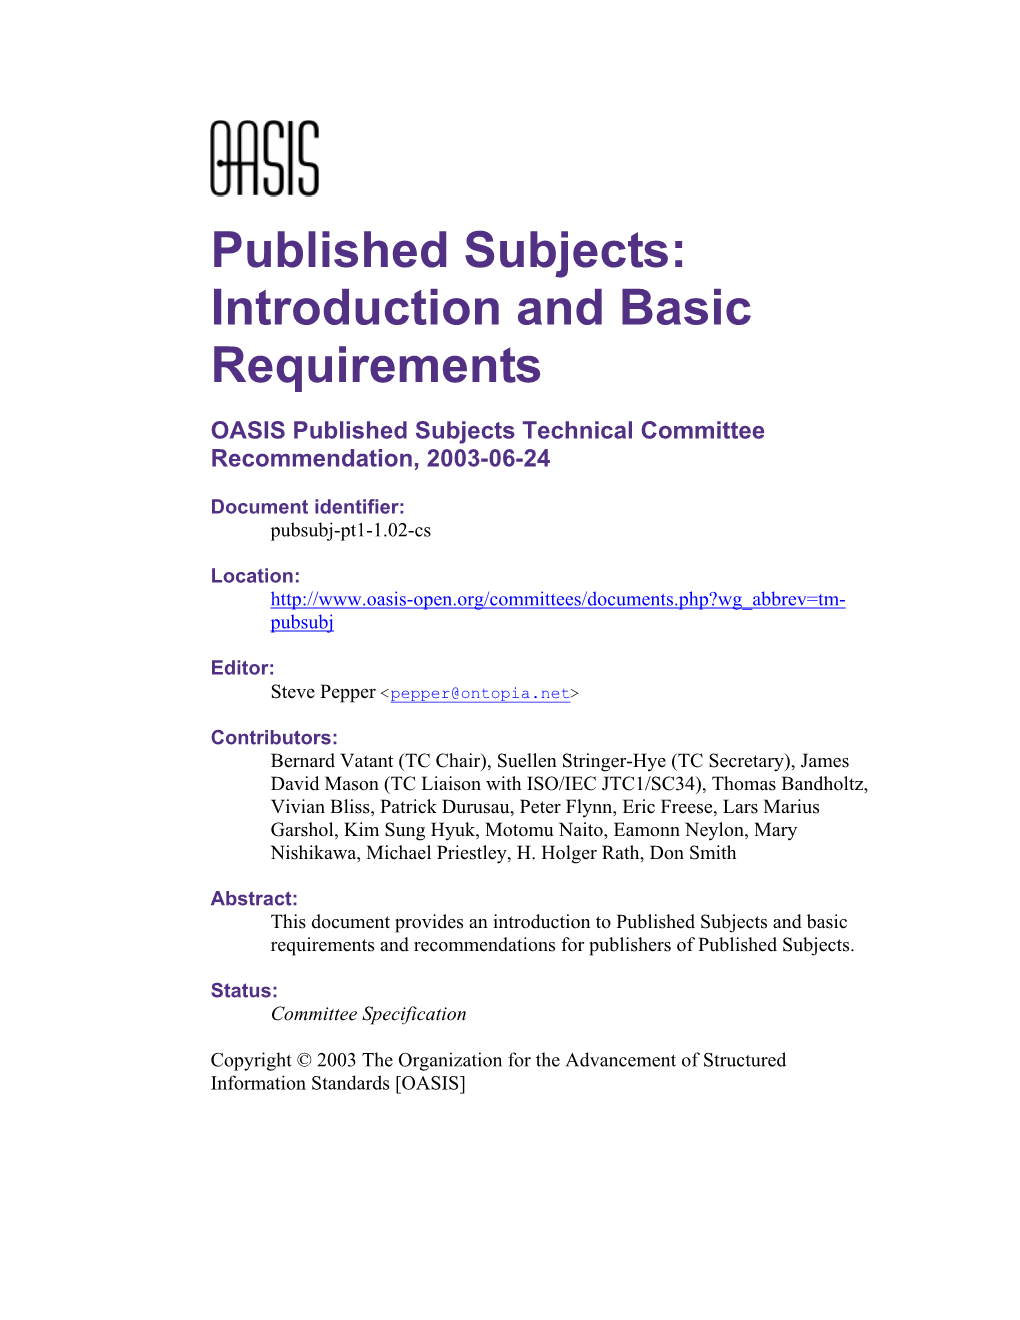 Published Subjects: Introduction and Basic Requirements